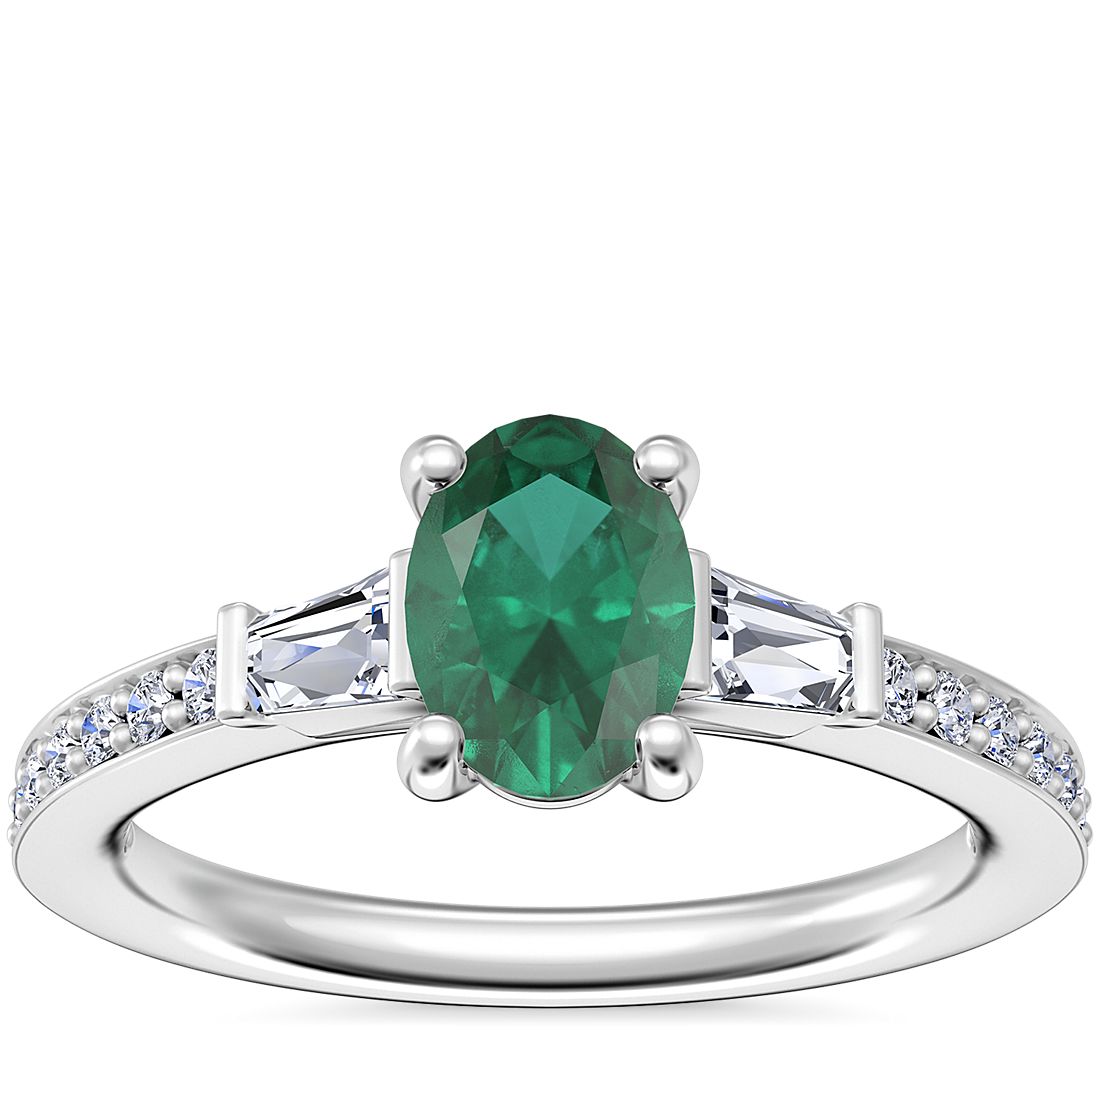 Tapered Baguette Diamond Cathedral Engagement Ring with Oval Emerald in 14k White Gold (7x5mm)